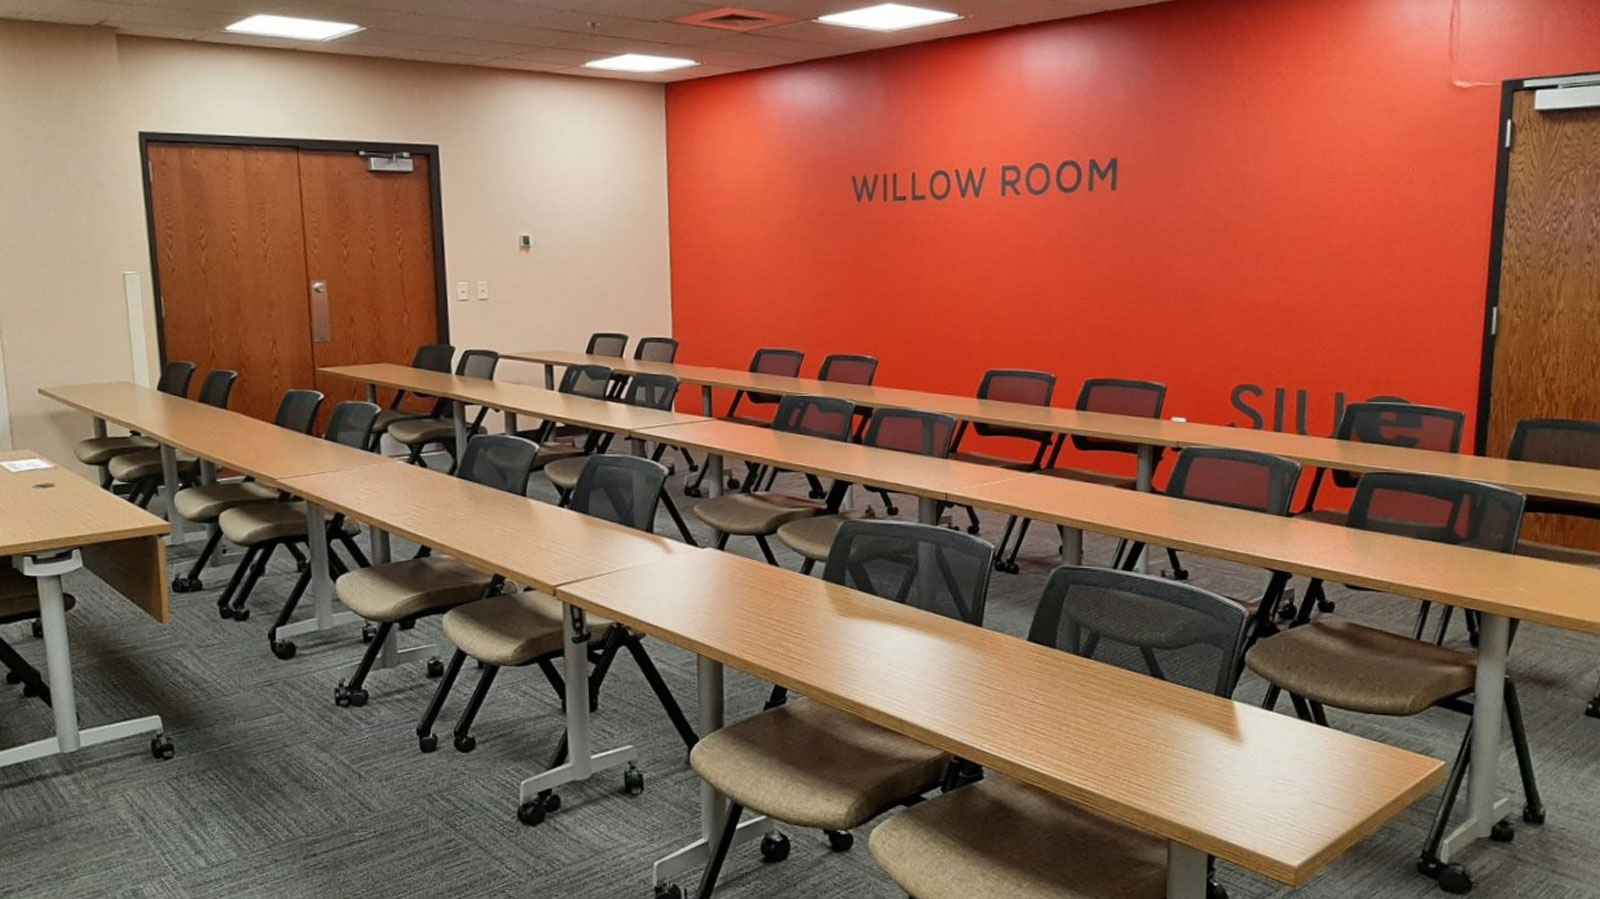 Willow Room